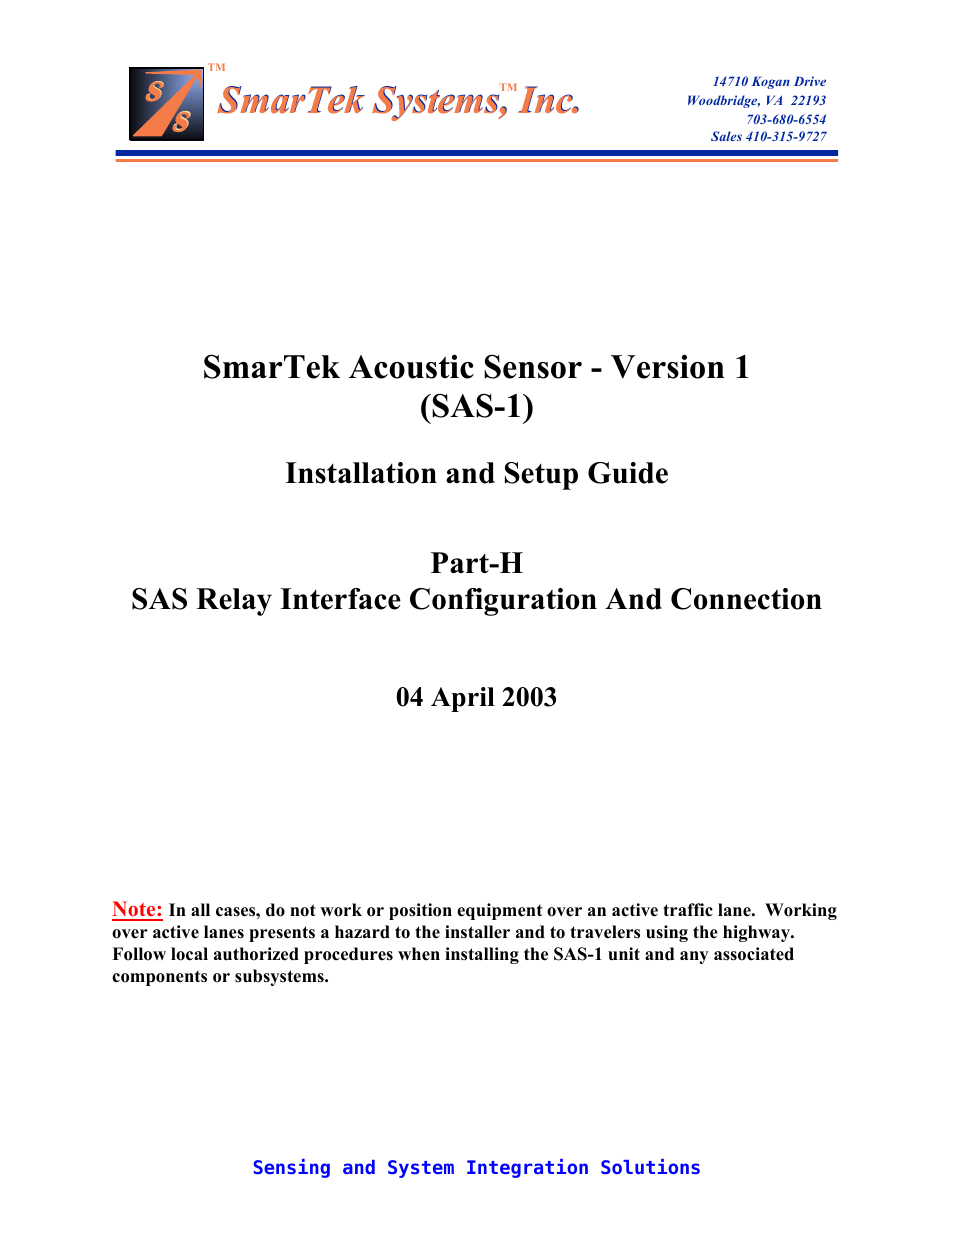 SAS-1 Relay Interface Configuration And Connection